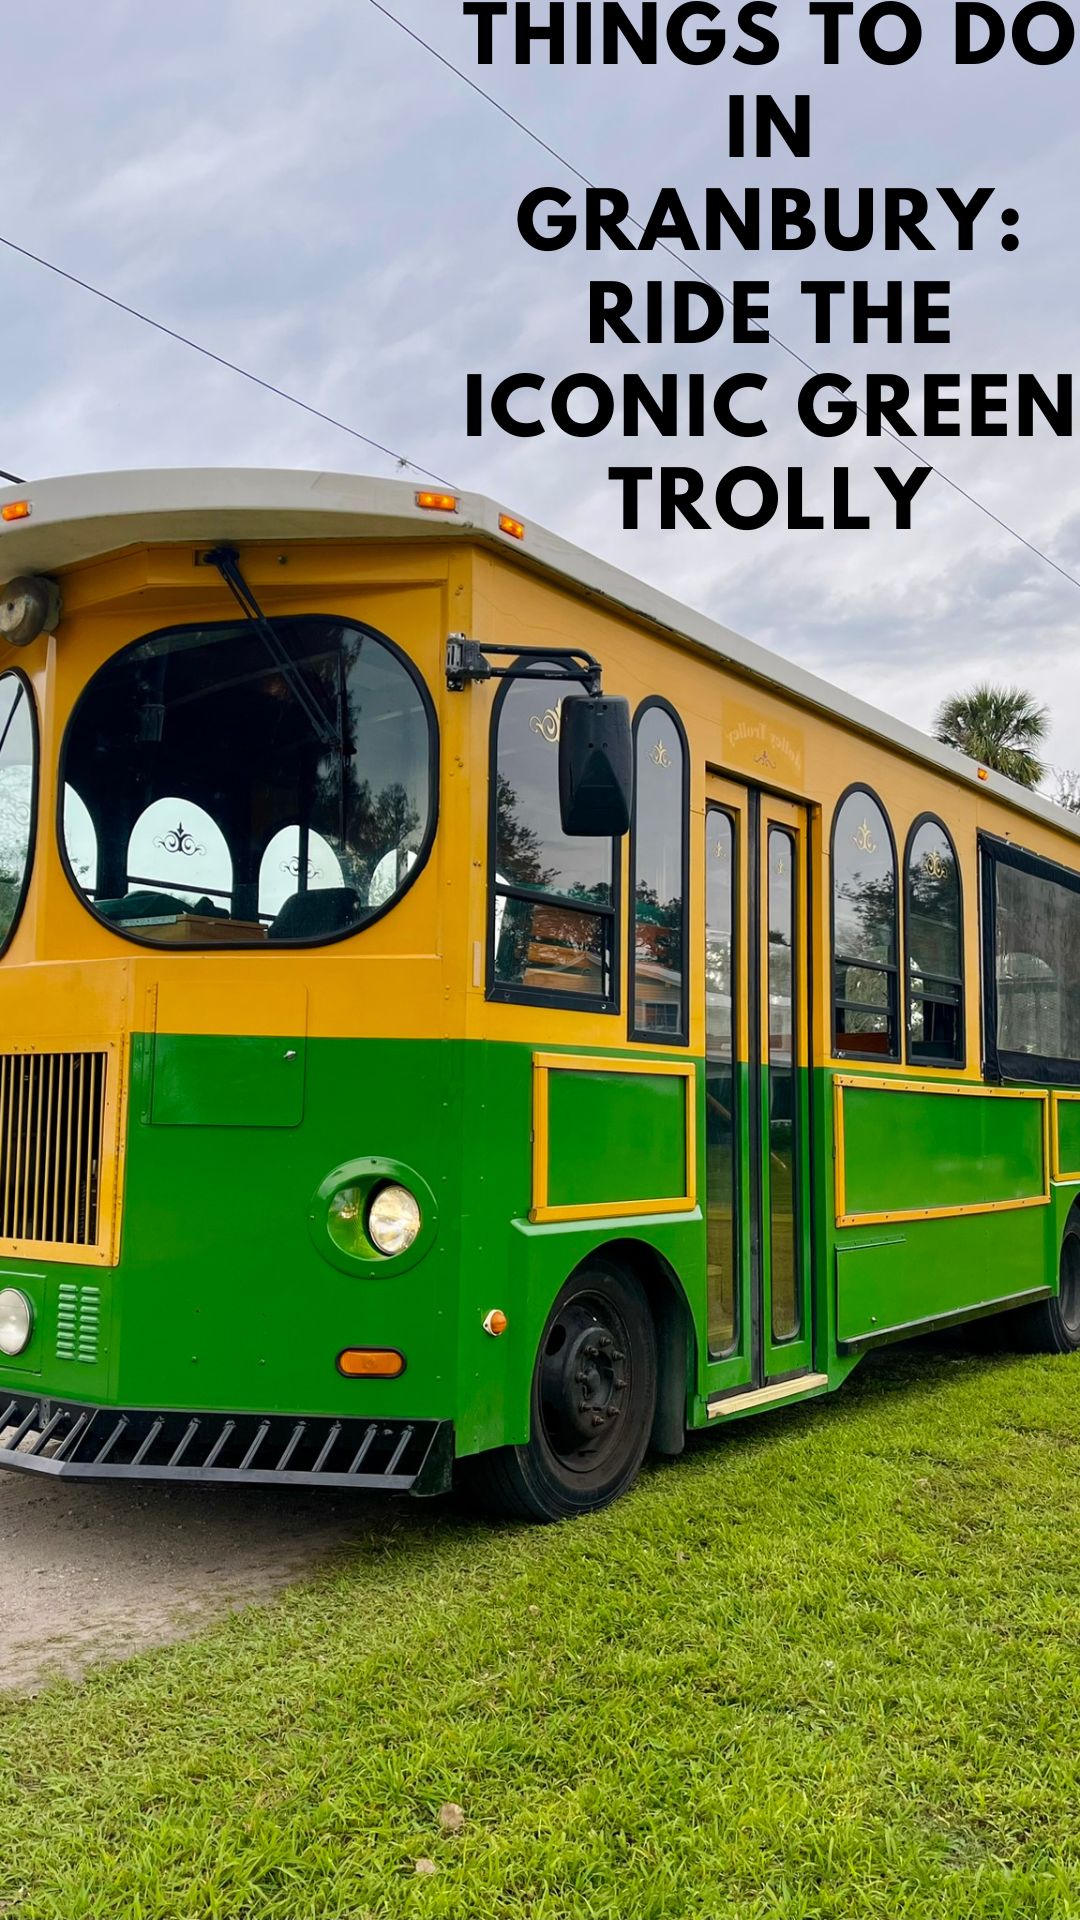 Things to Do in Granbury: Ride the Iconic Green Trolly